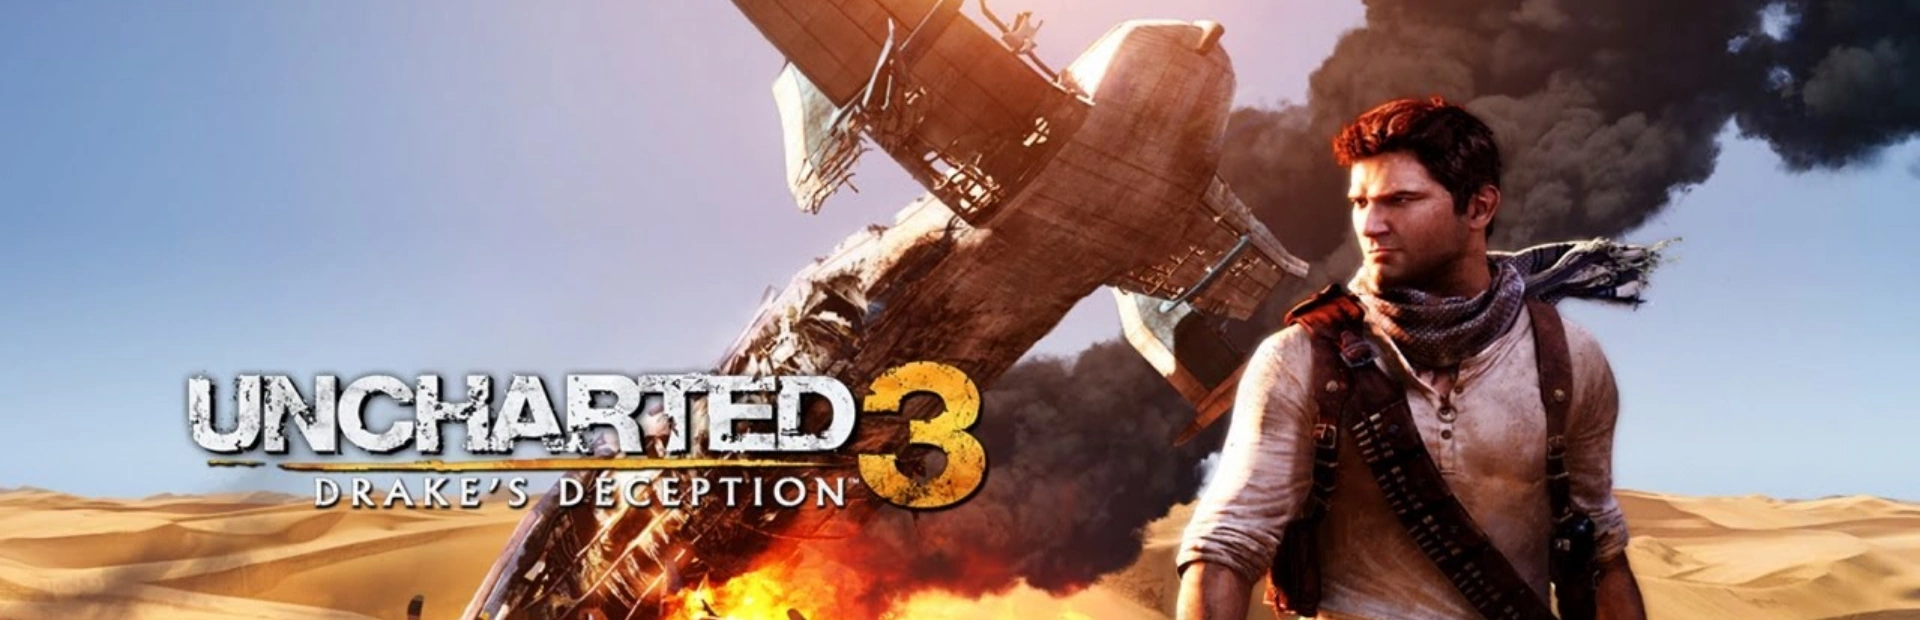 Uncharted 3 Drakes Deception.banner1